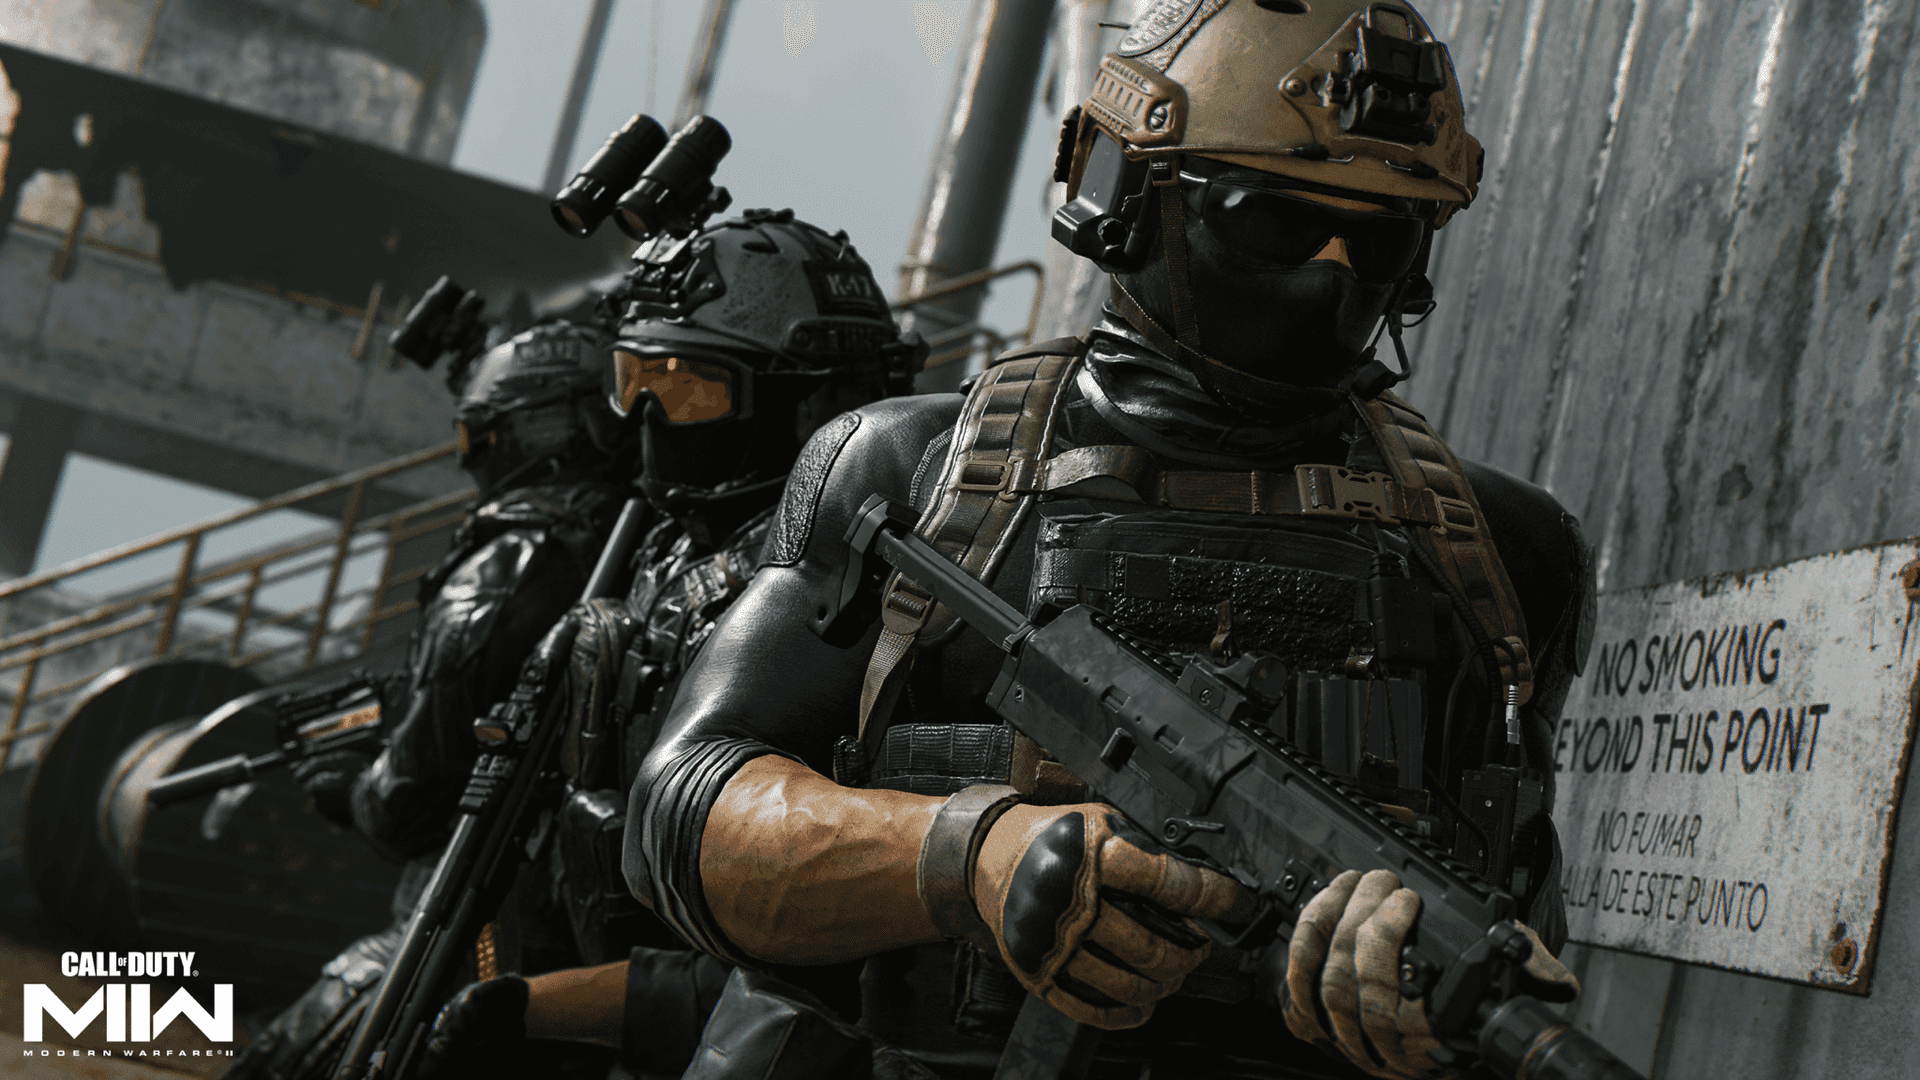 Call Of Duty HD Wallpapers and 4K Backgrounds - Wallpapers Den